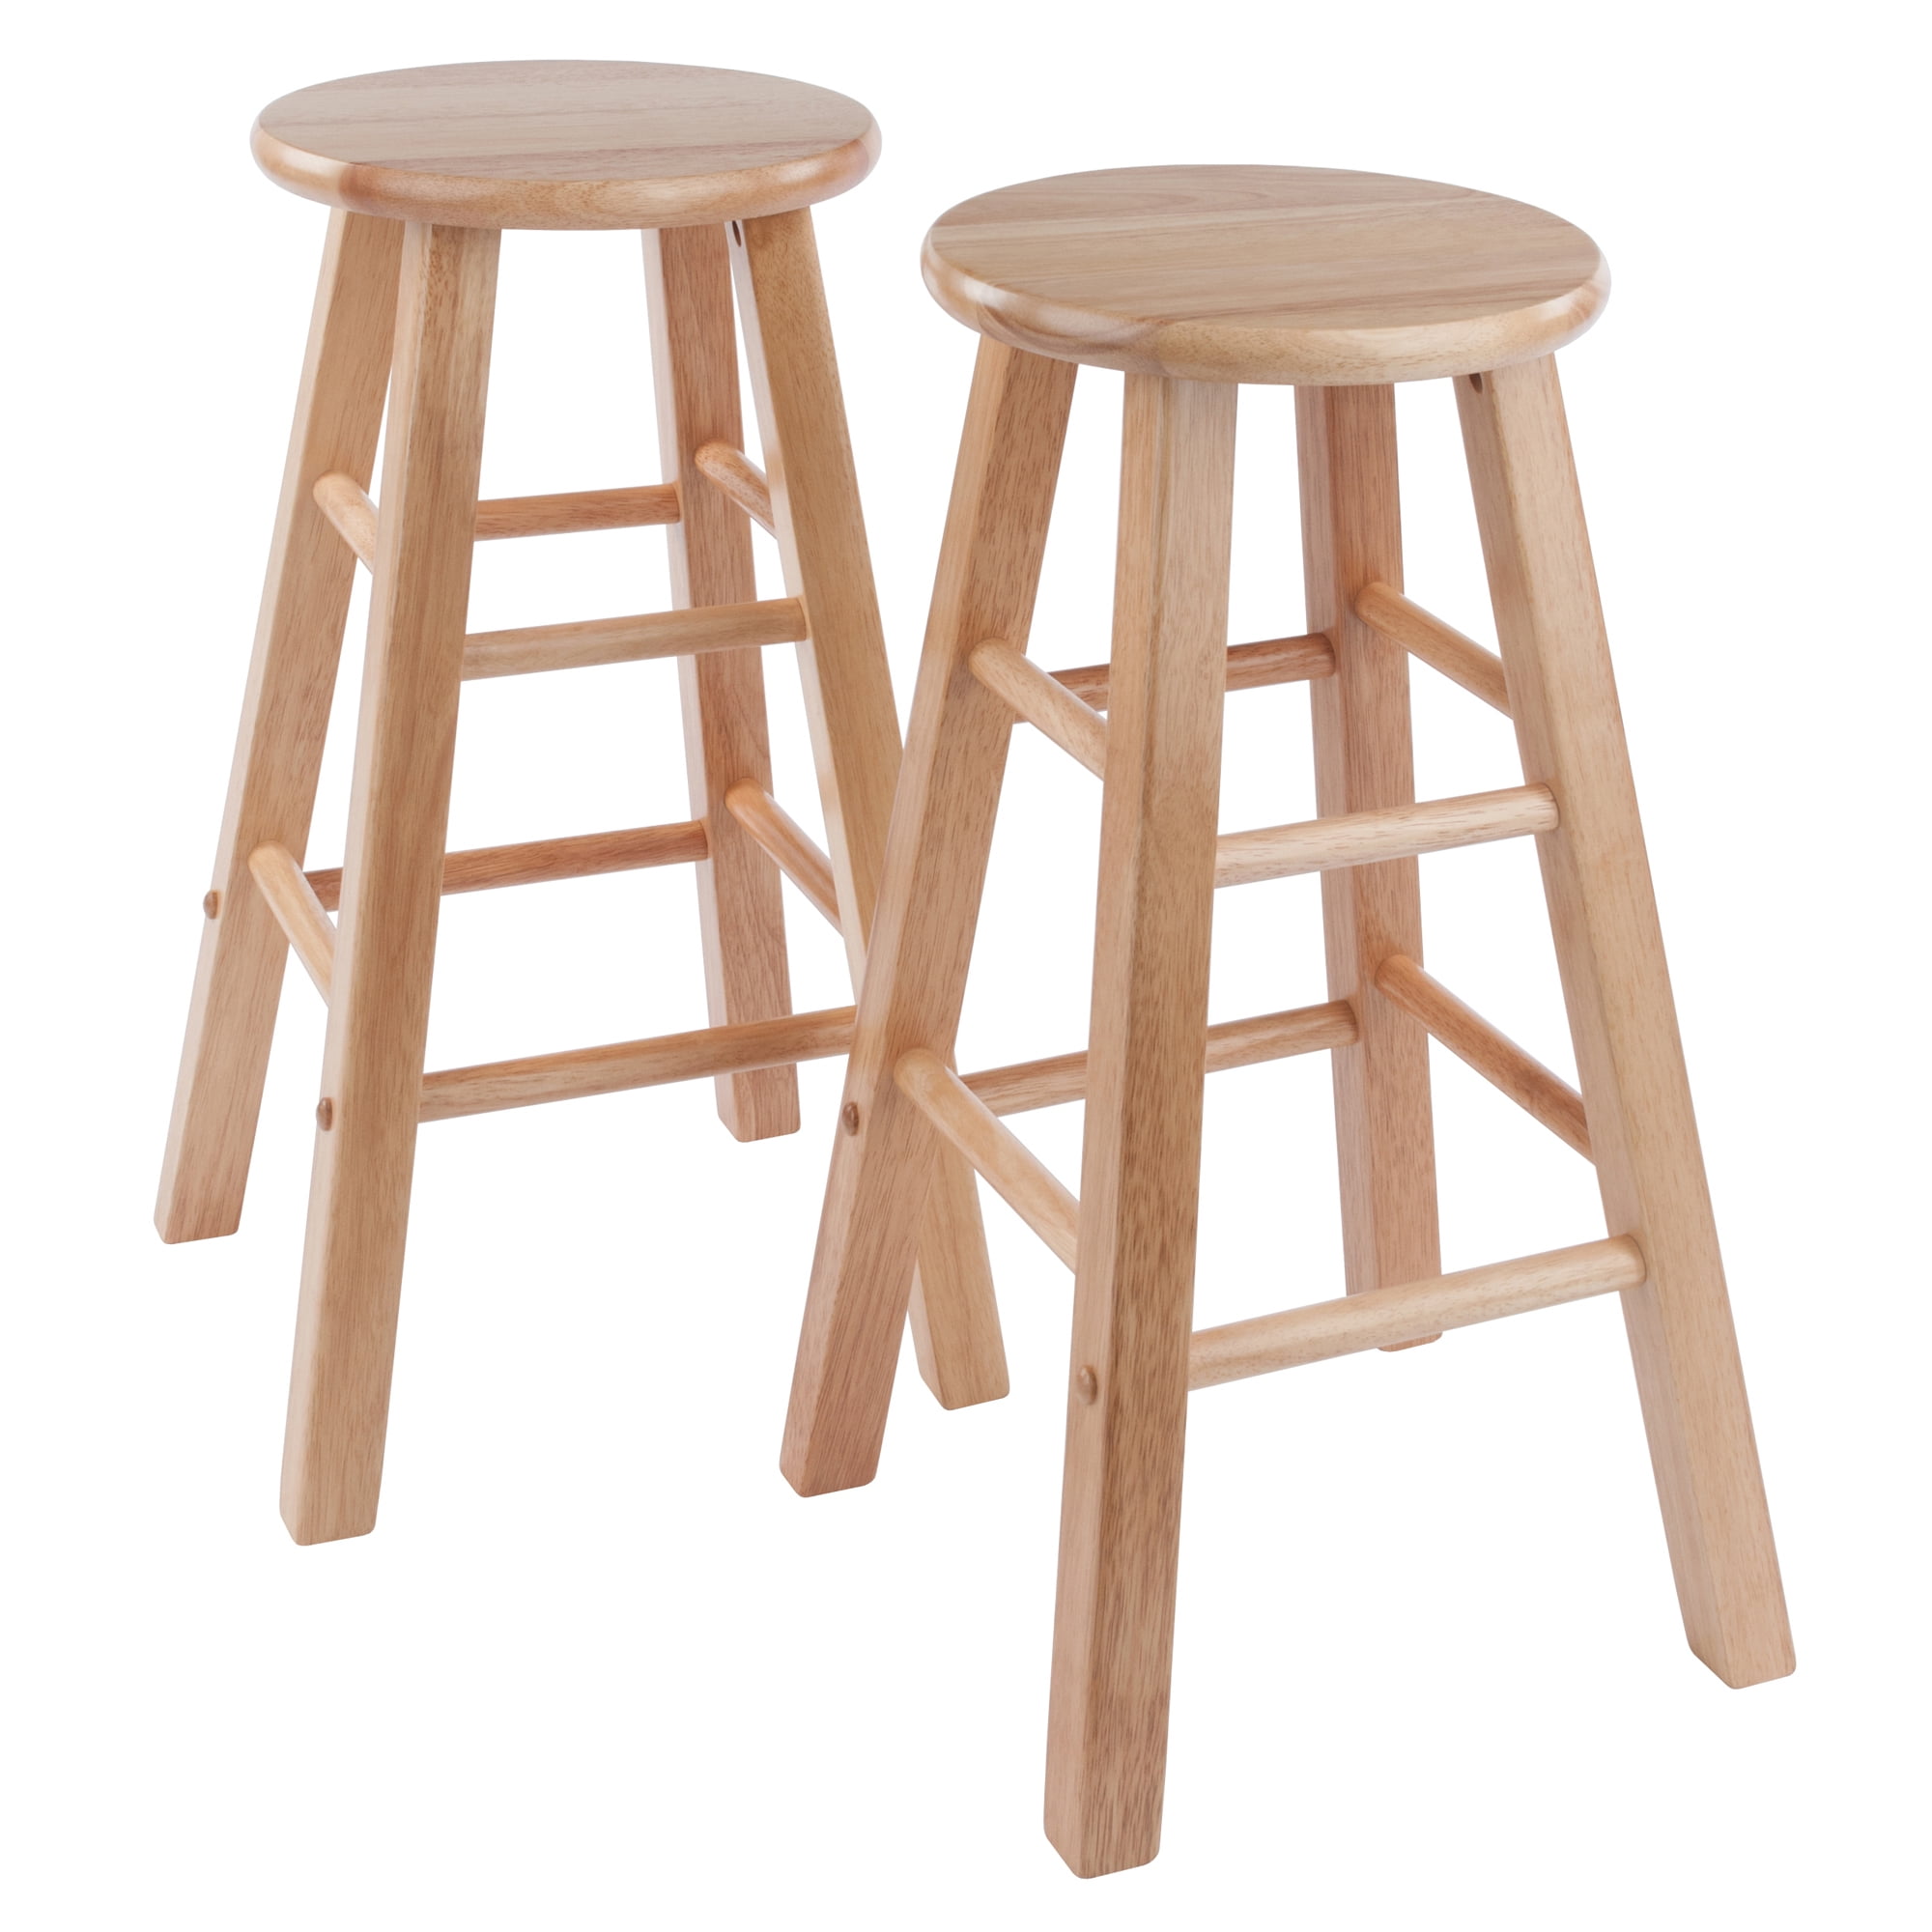 Winsome Wood Element 2-Piece Counter Stools, Natural Finish - image 1 of 8